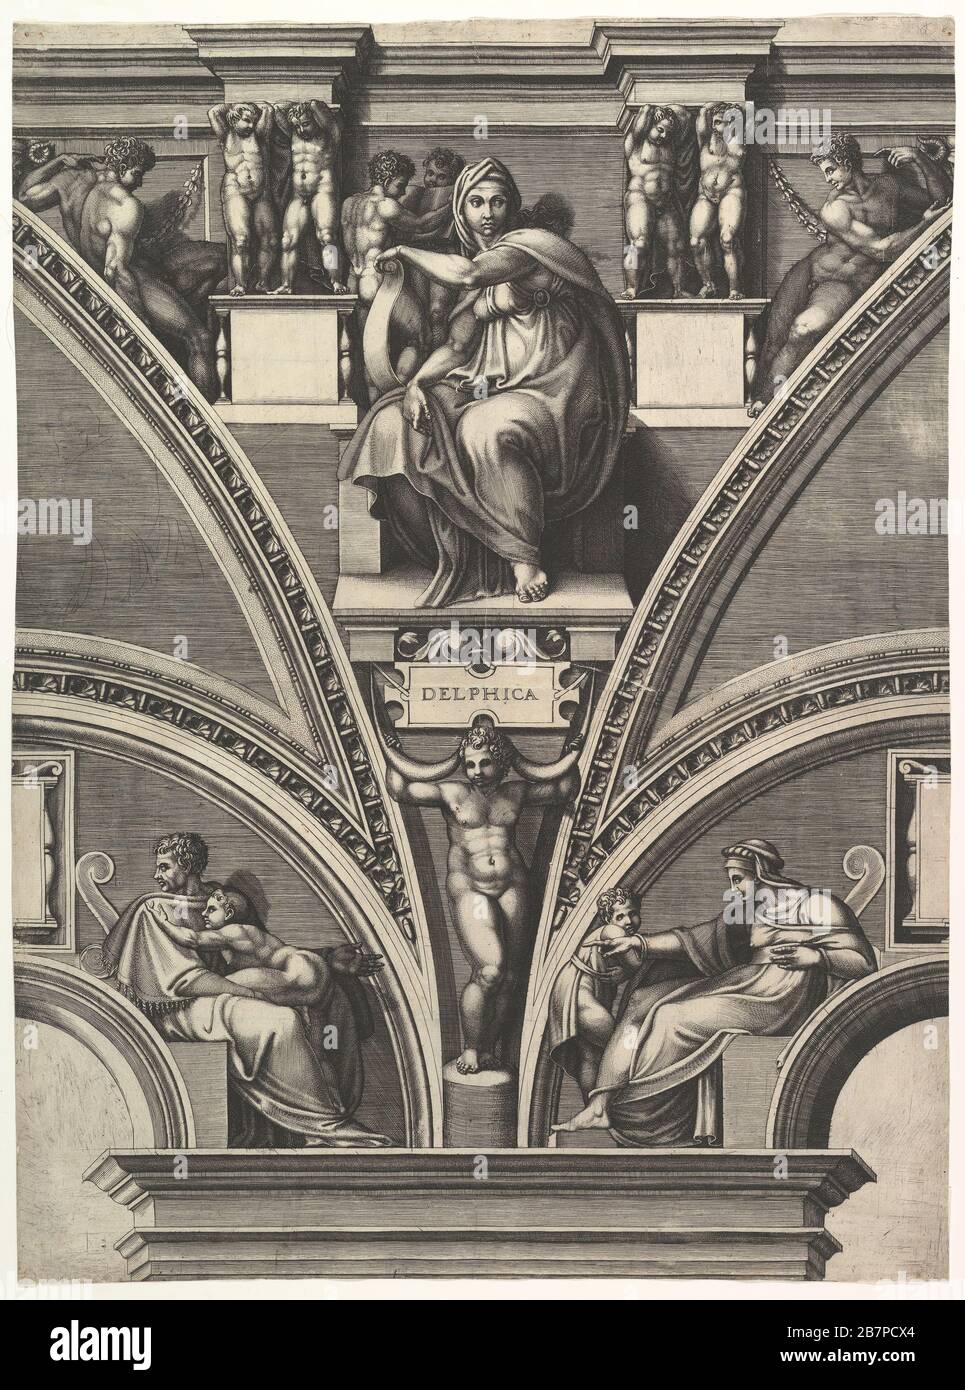 The Delphic Sibyl; from the series of Prophets and Sibyls in the Sistine Chapel, 1570-75. After Michelangelo Buonarroti Stock Photo